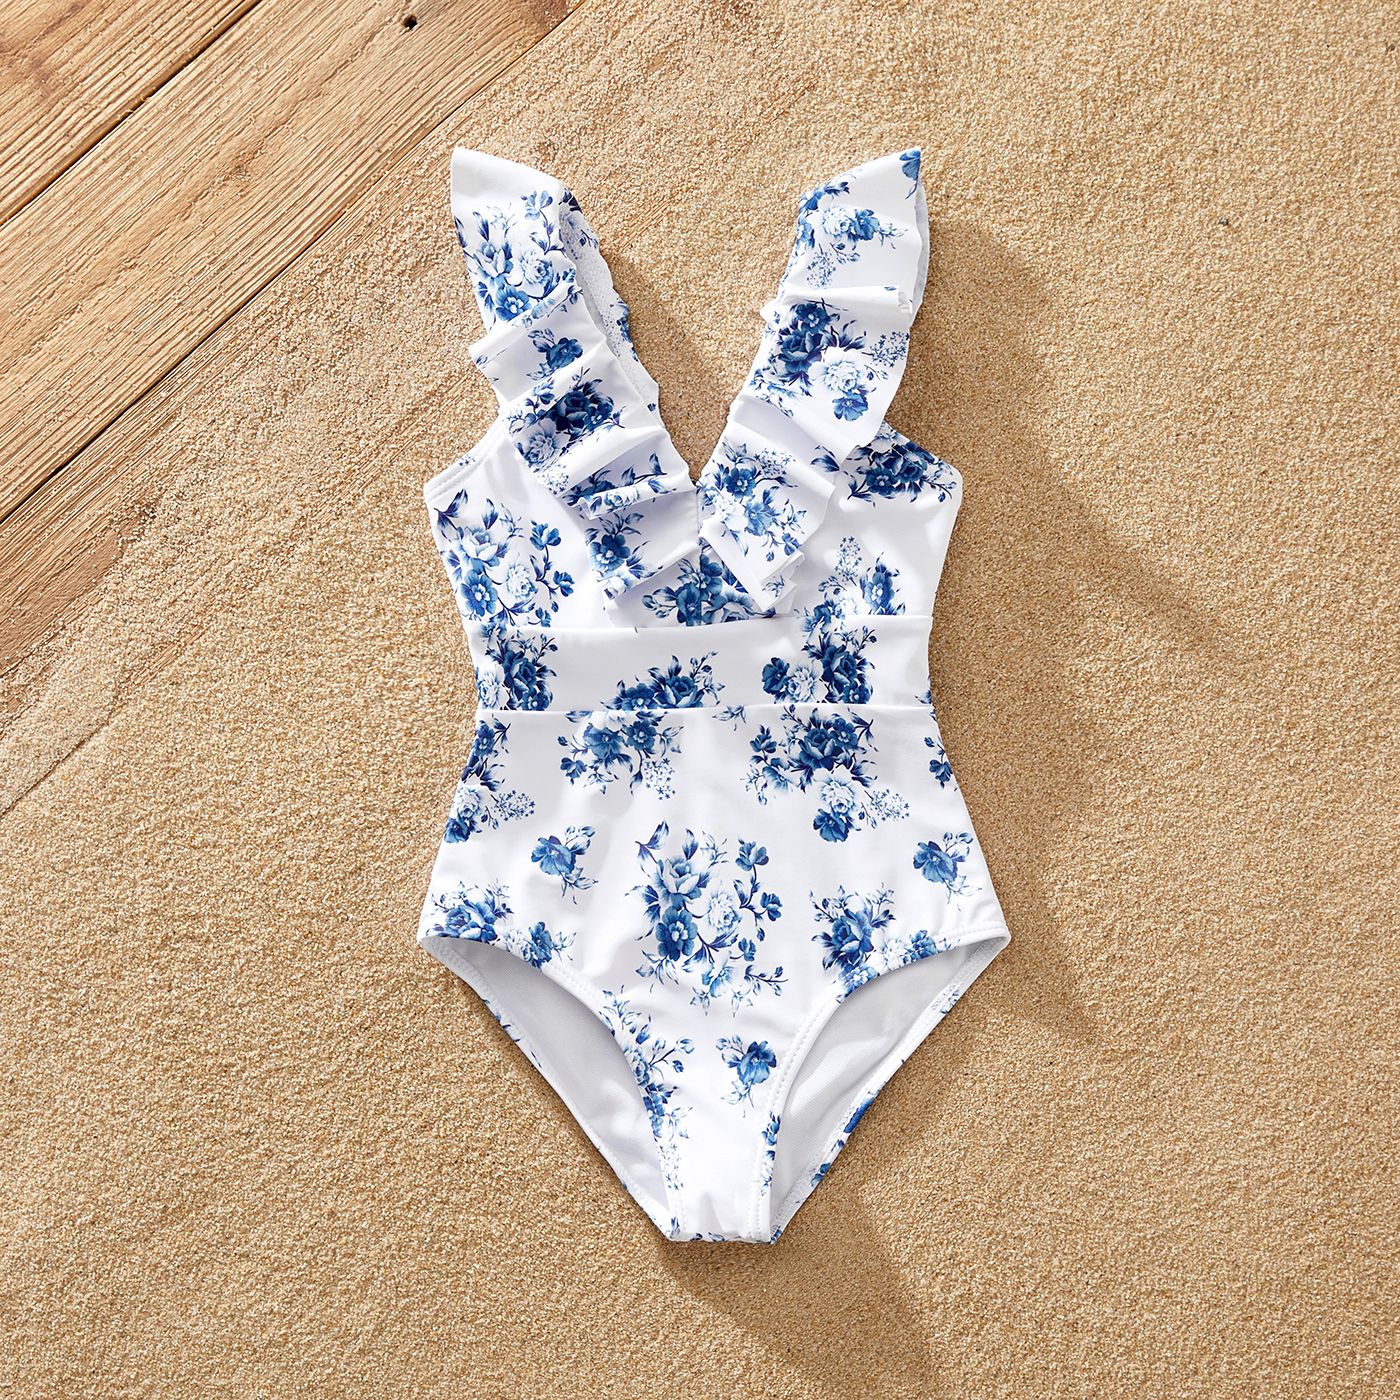 Family Matching Allover Floral Print Ruffled One-piece Swimsuit Or Swim Trunks Shorts